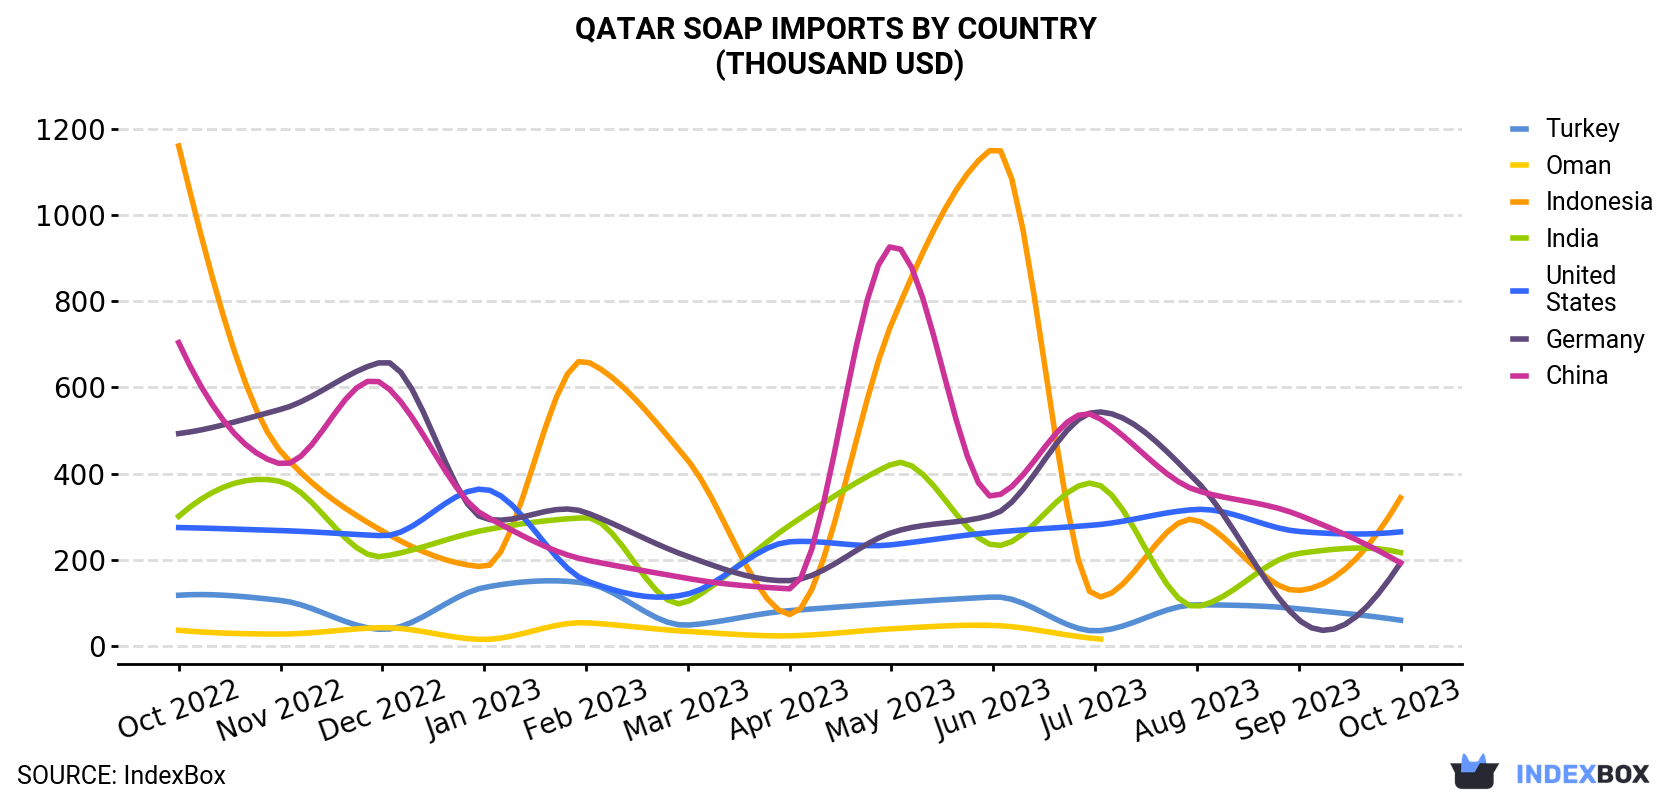 Qatar Soap Imports By Country (Thousand USD)